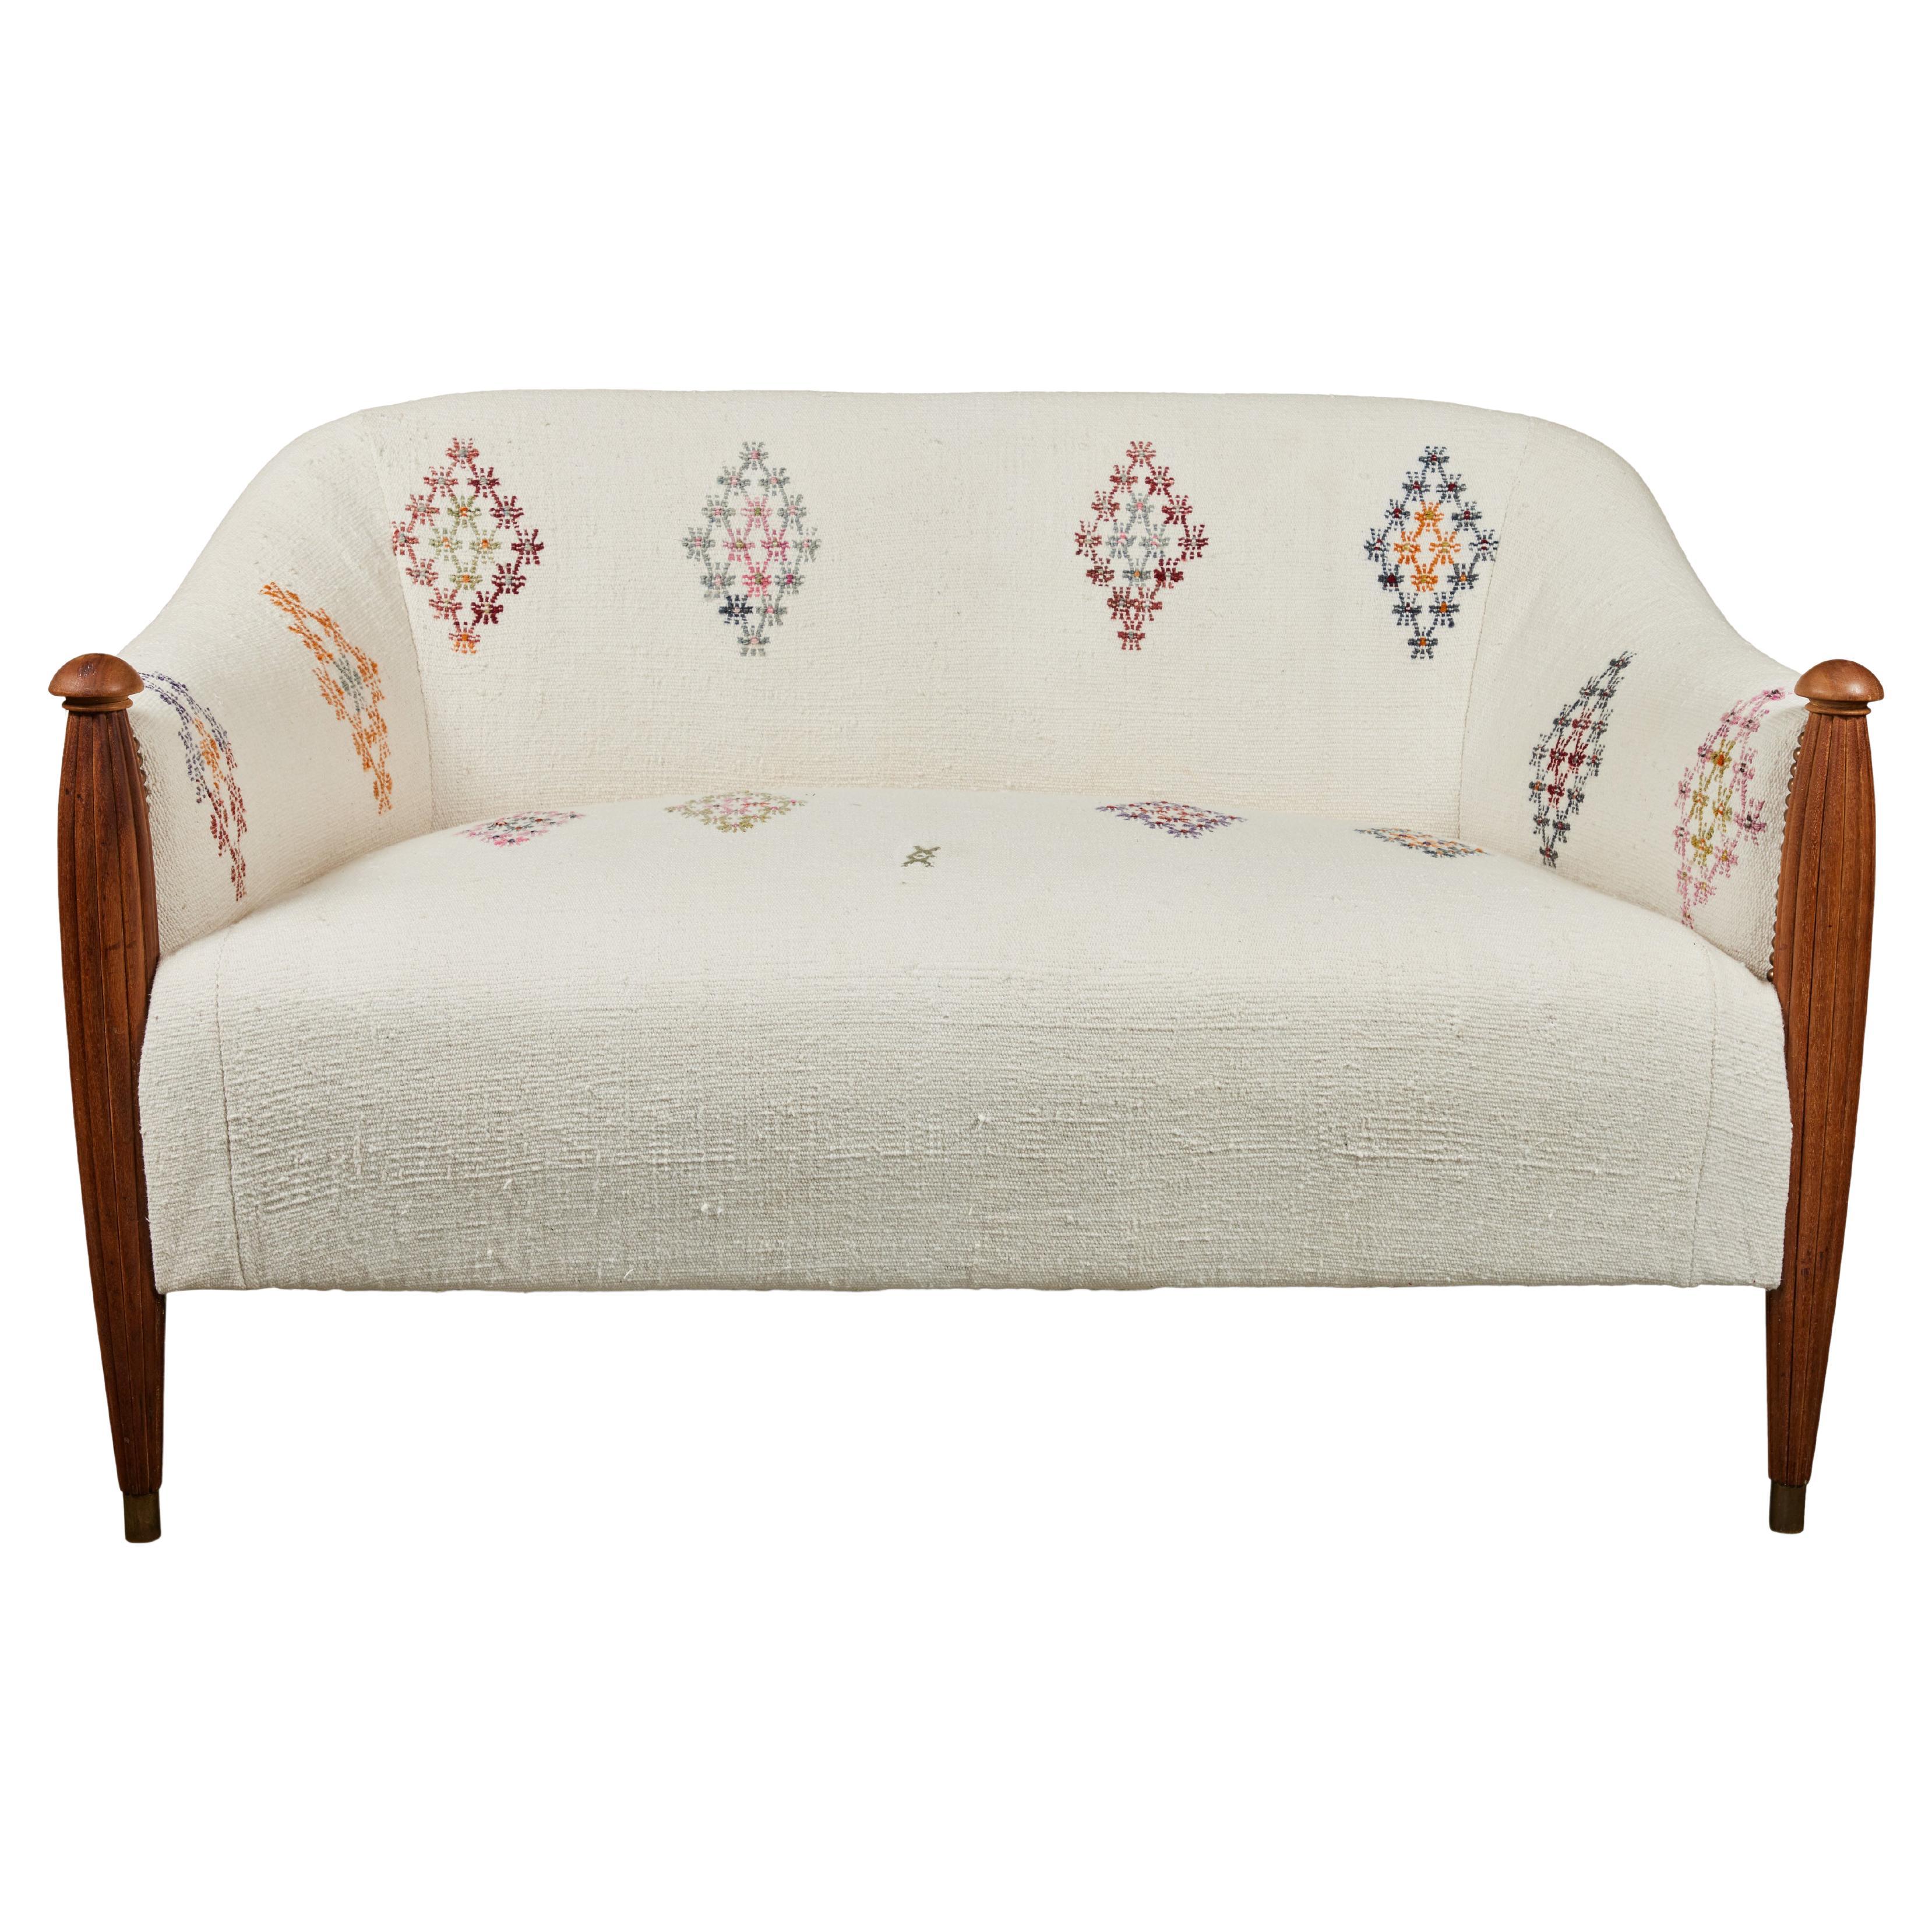 Vintage Settee Newly Upholstered in a Turkish Rug